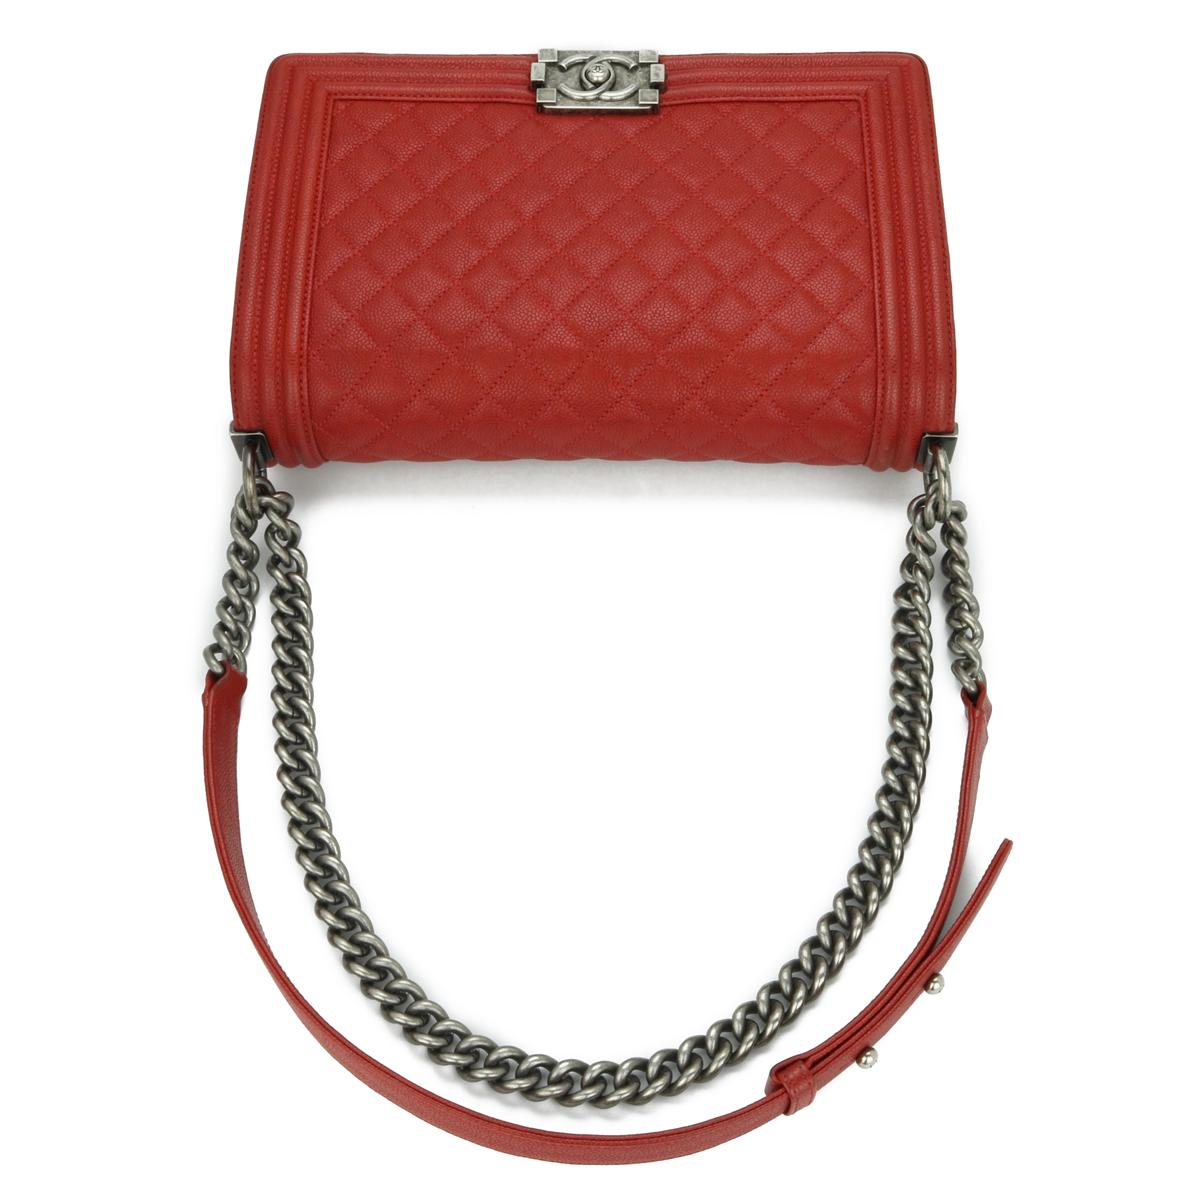 CHANEL New Medium Quilted Boy Bag in Red Caviar with Ruthenium Hardware 2016 For Sale 7